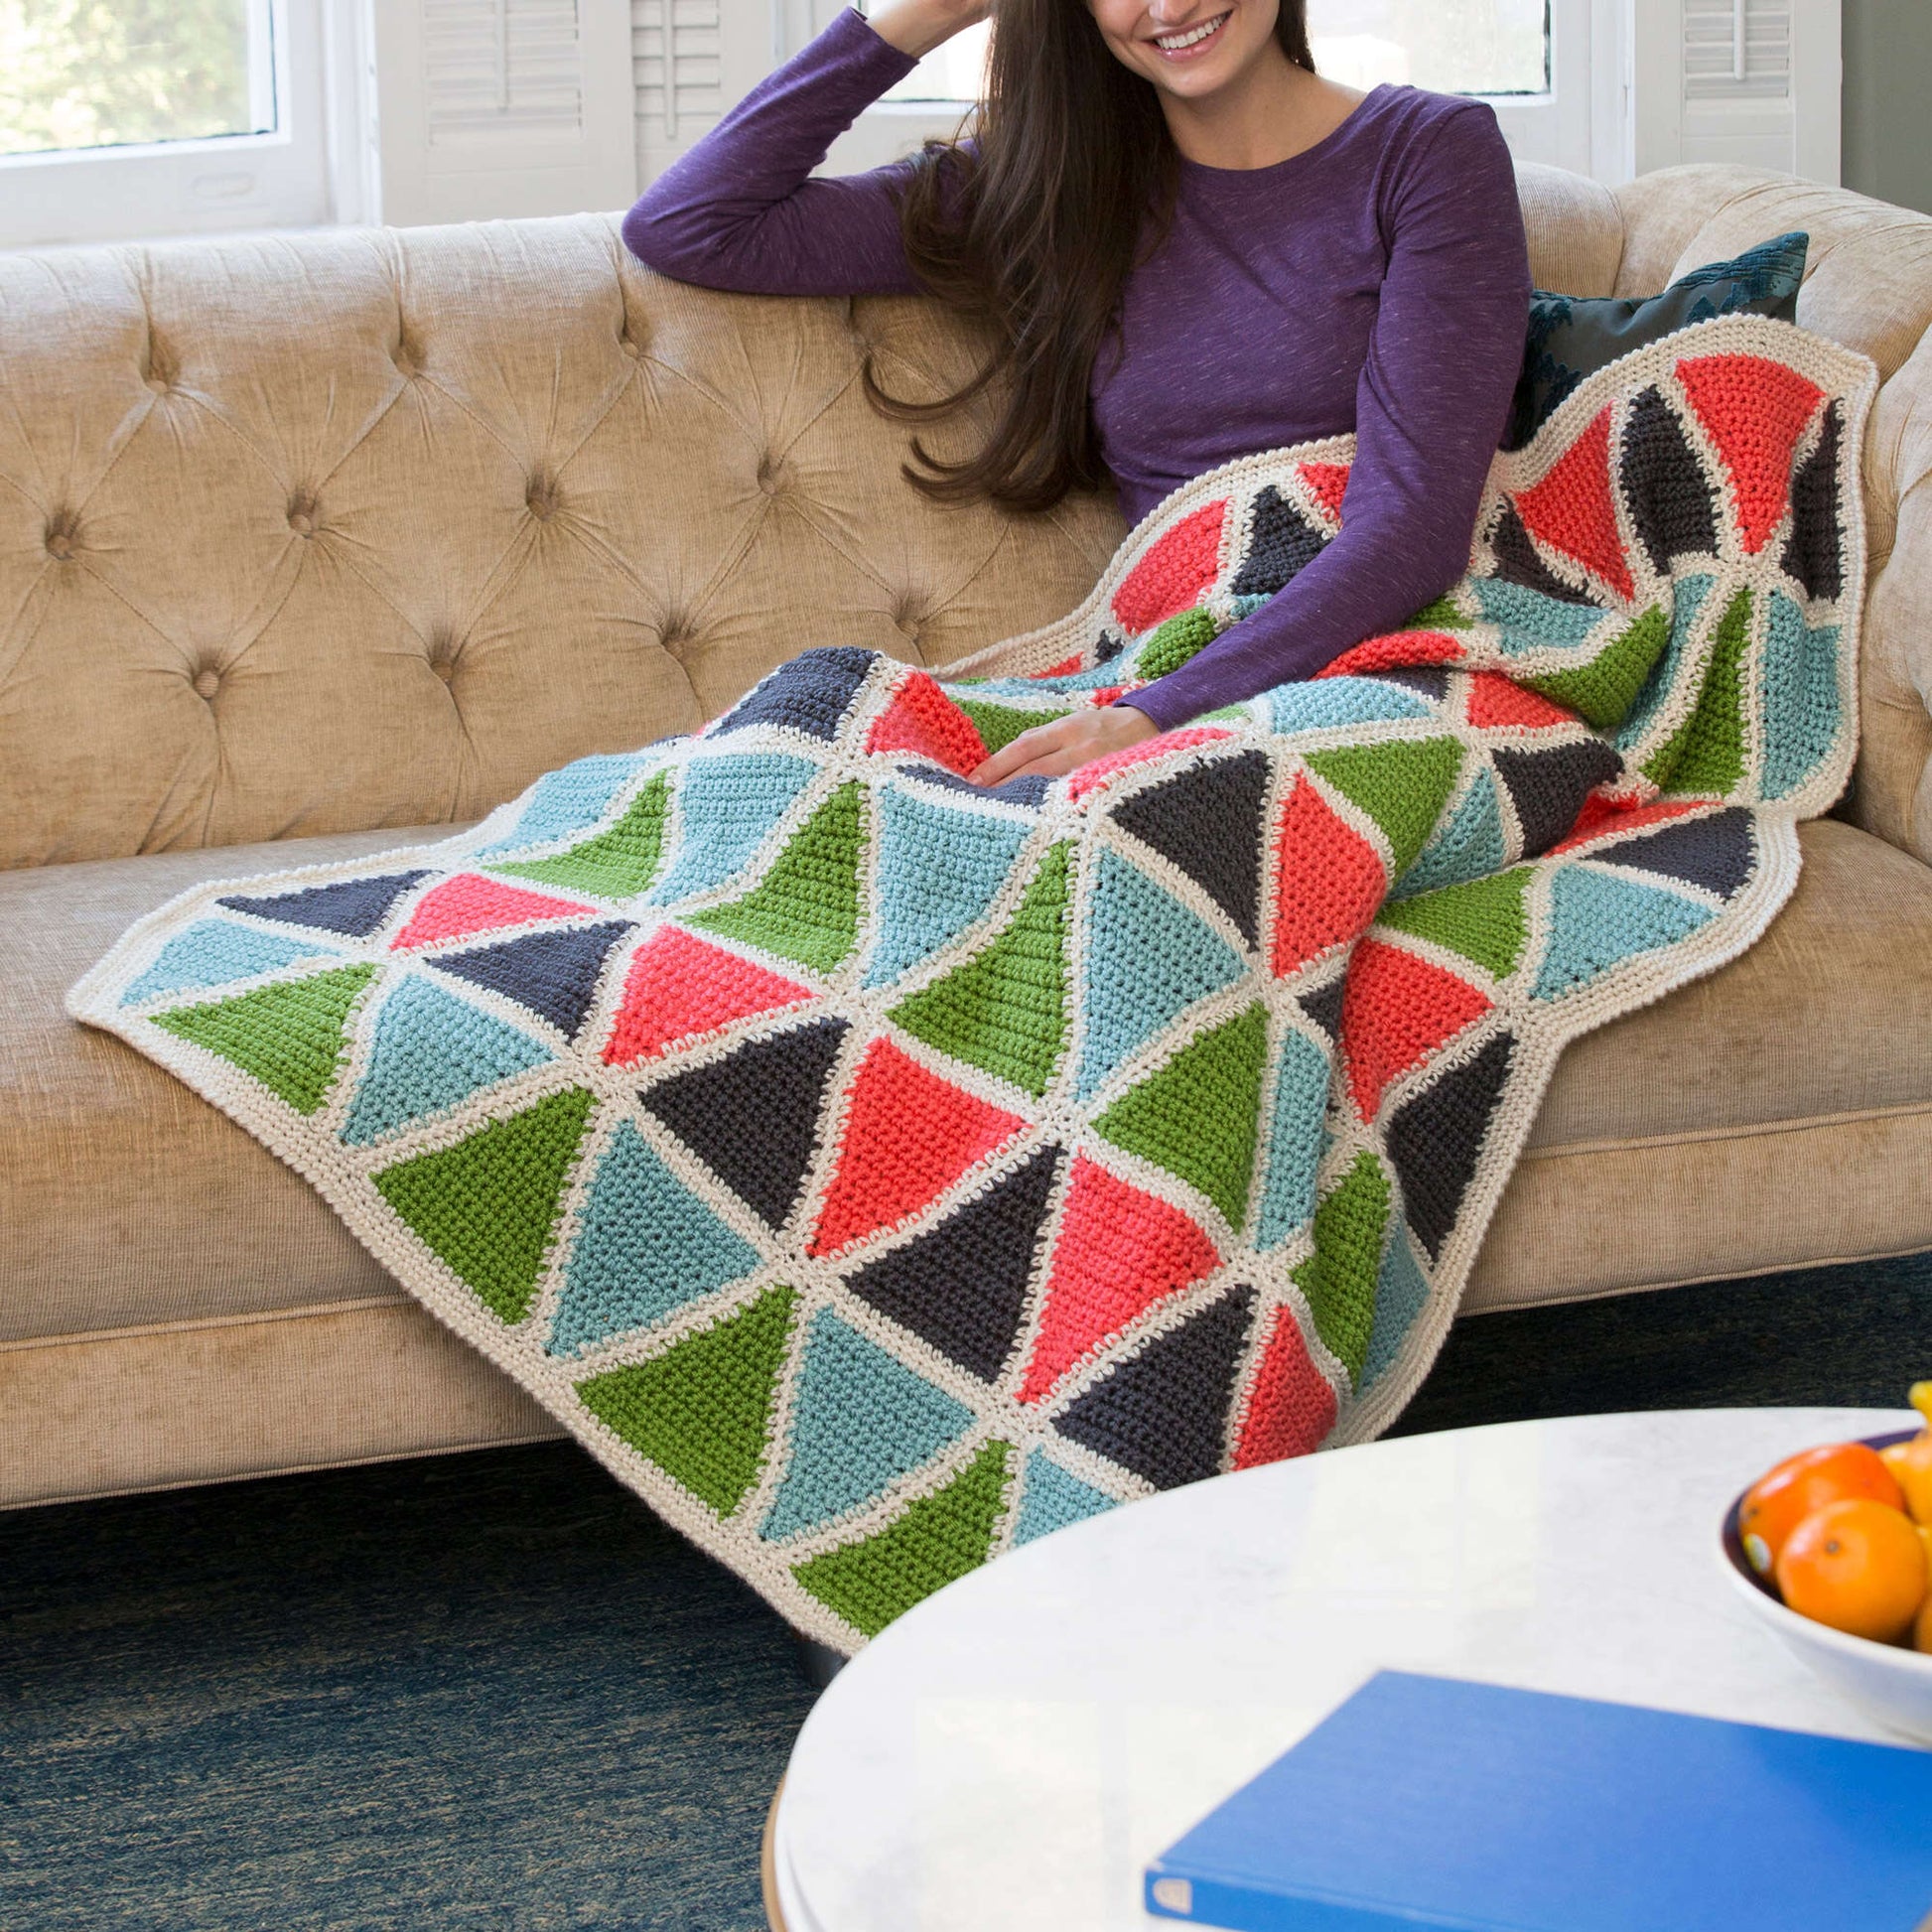 Free Red Heart Crochet Colorful Triangle Throw Pattern